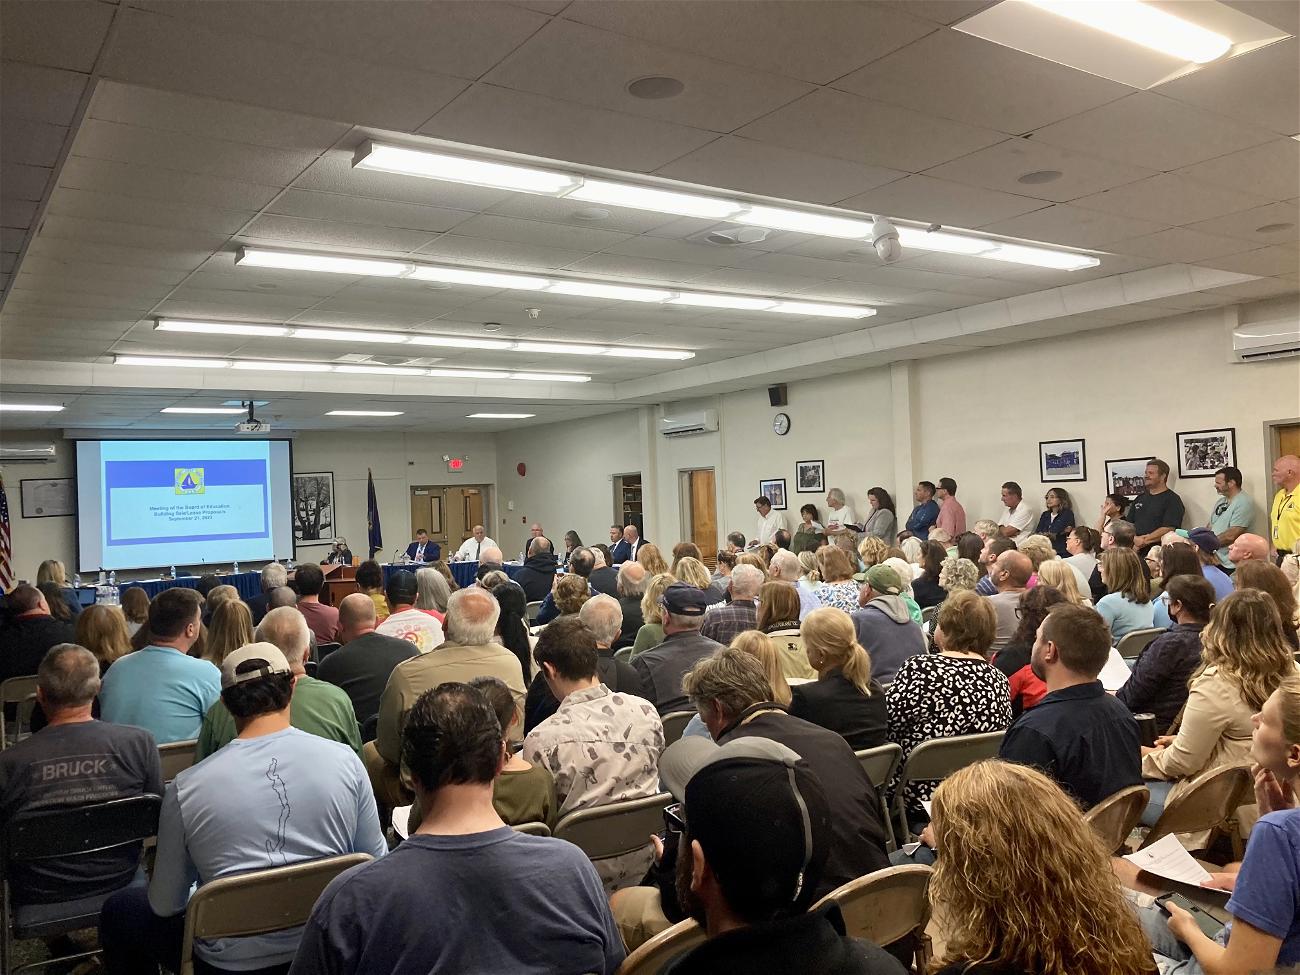 A standing-room only crowd at tonight’s board of education meeting, which was quickly adjourned after interruptions from the audience and a report of threats made toward BOE members.